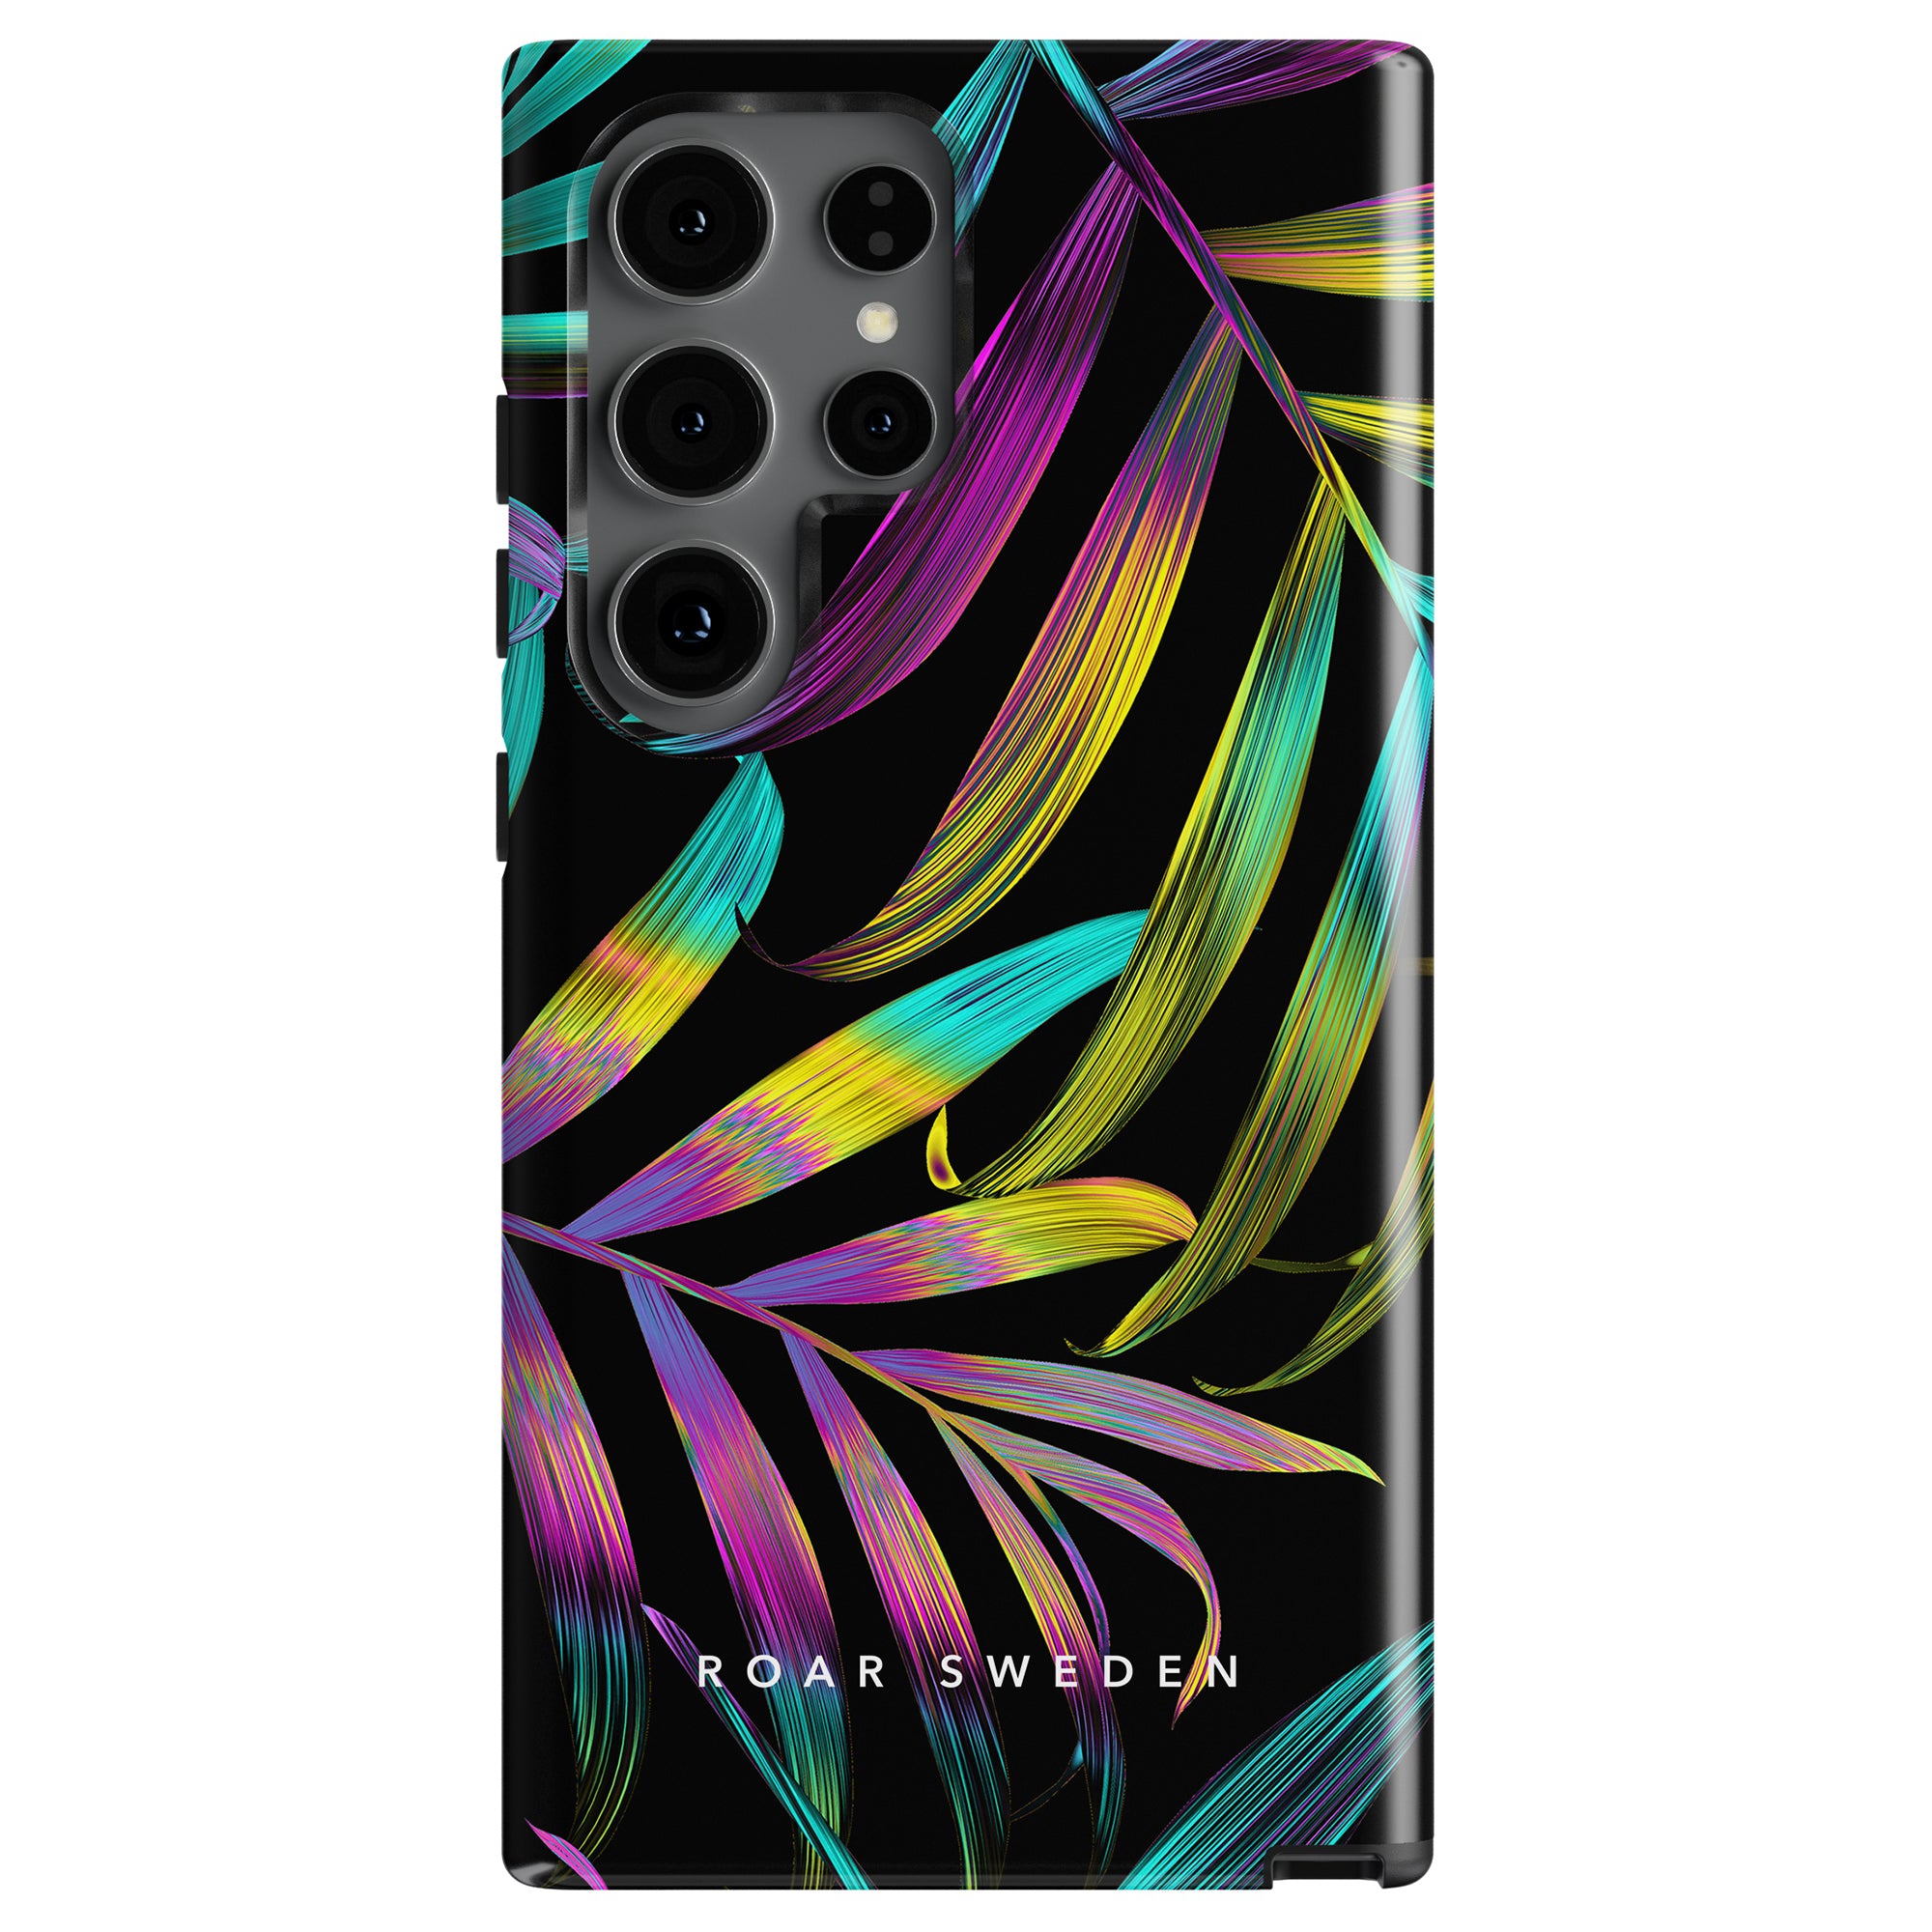 A Fluorescence - Tough case with a sleek black background, adorned with colorful abstract leaf patterns in vibrant neonfärger and the text "ROAR SWEDEN" at the bottom.